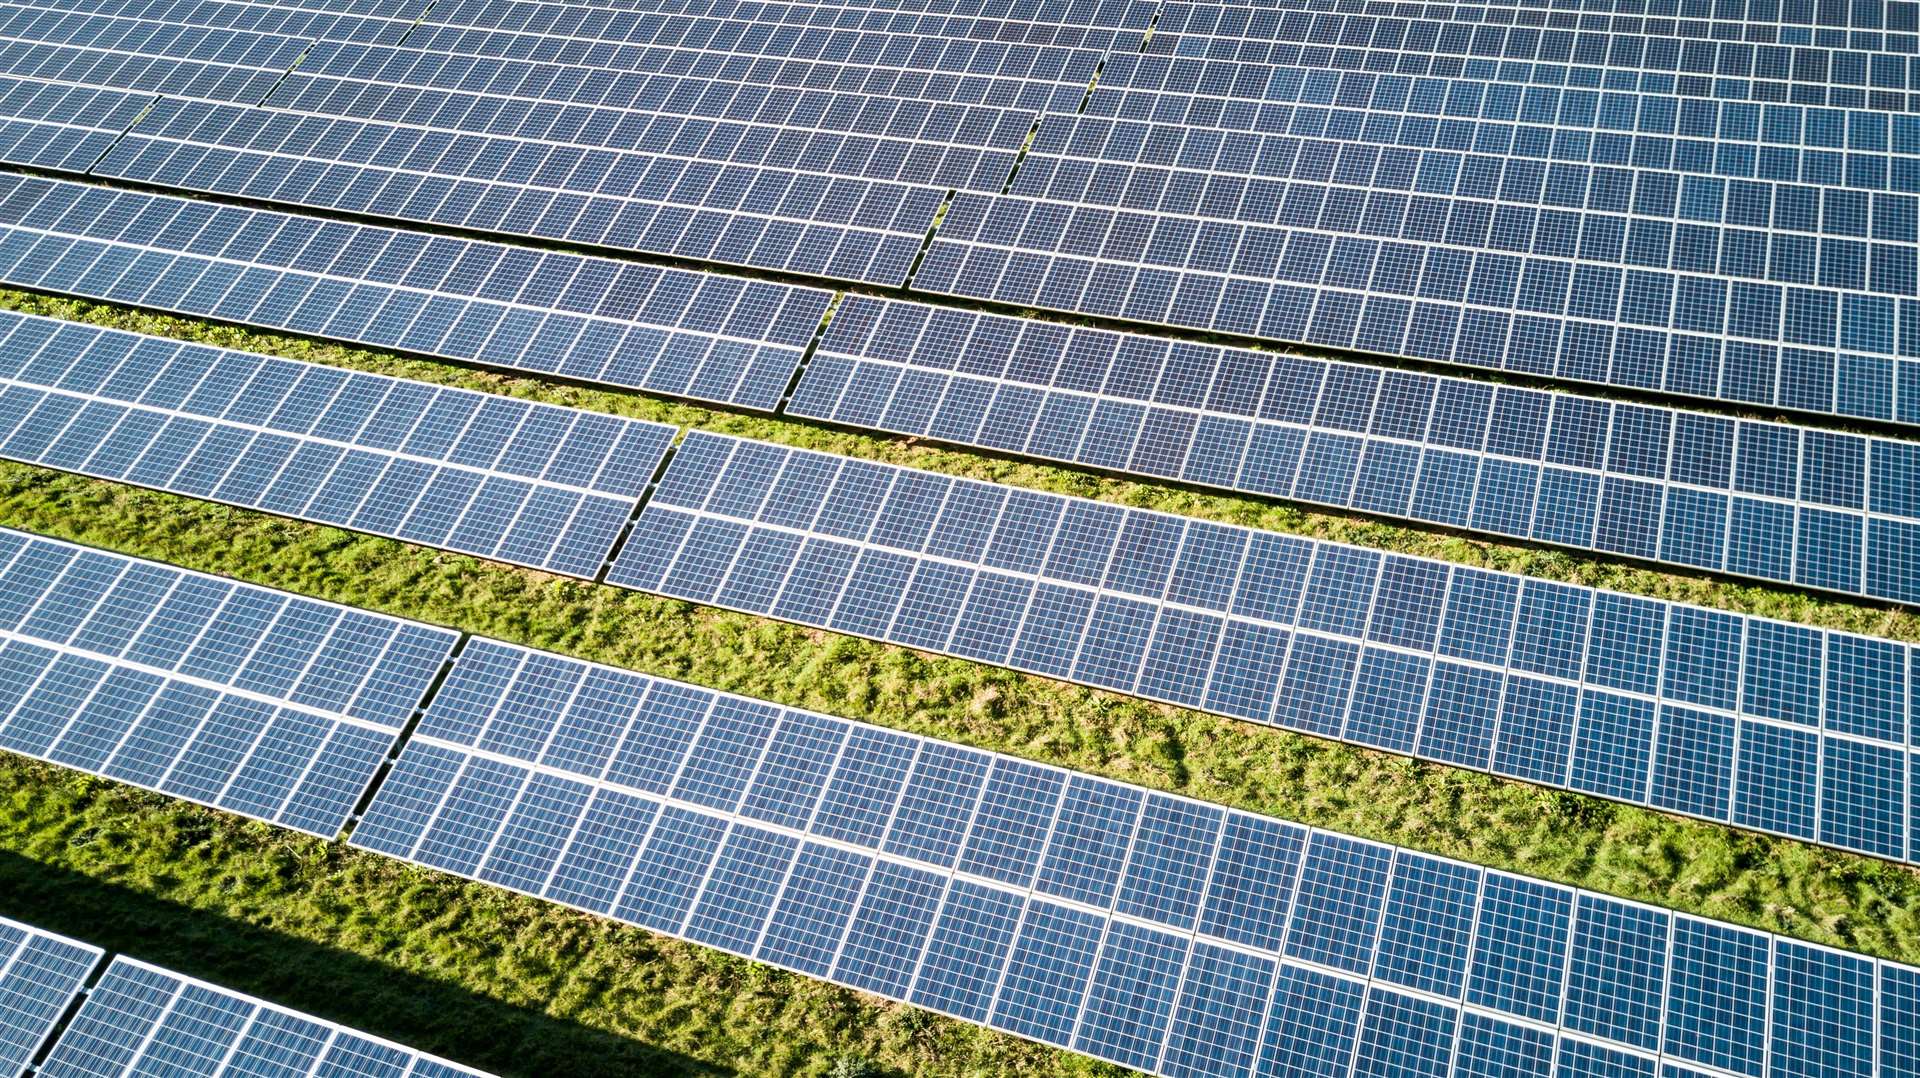 Solar panels will cover more than 180 acres of farmland near Marden. Stock image